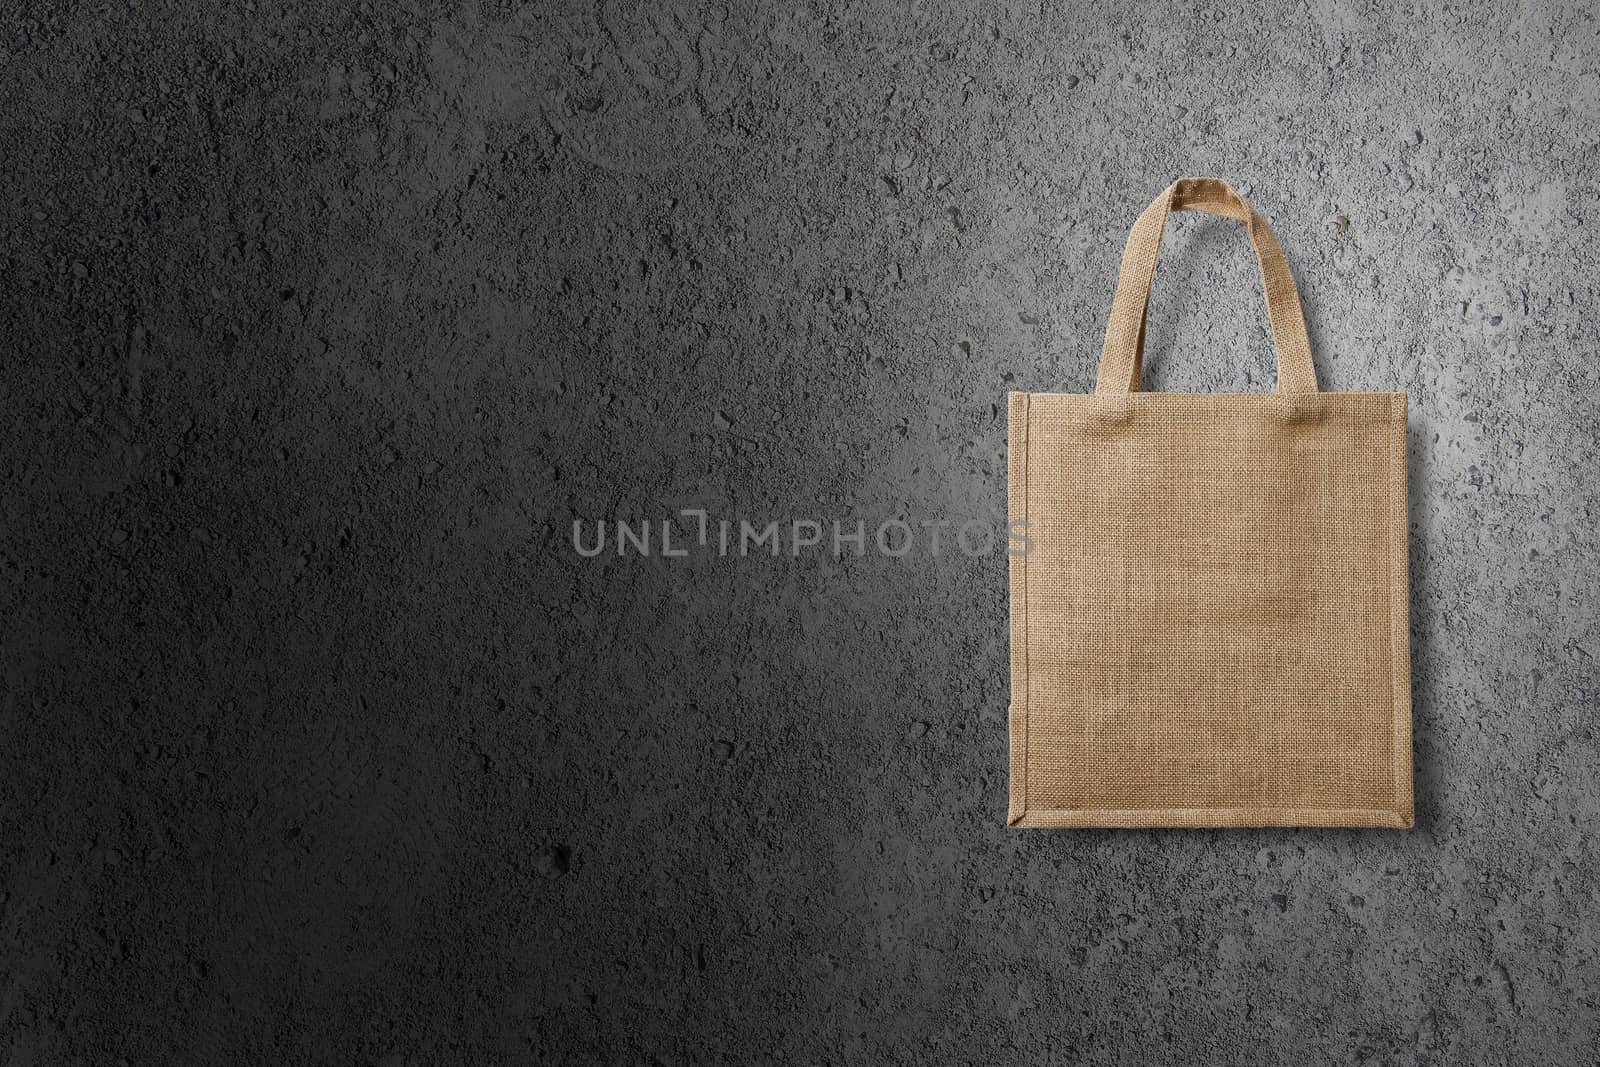 eco bag for shopping on a dark background